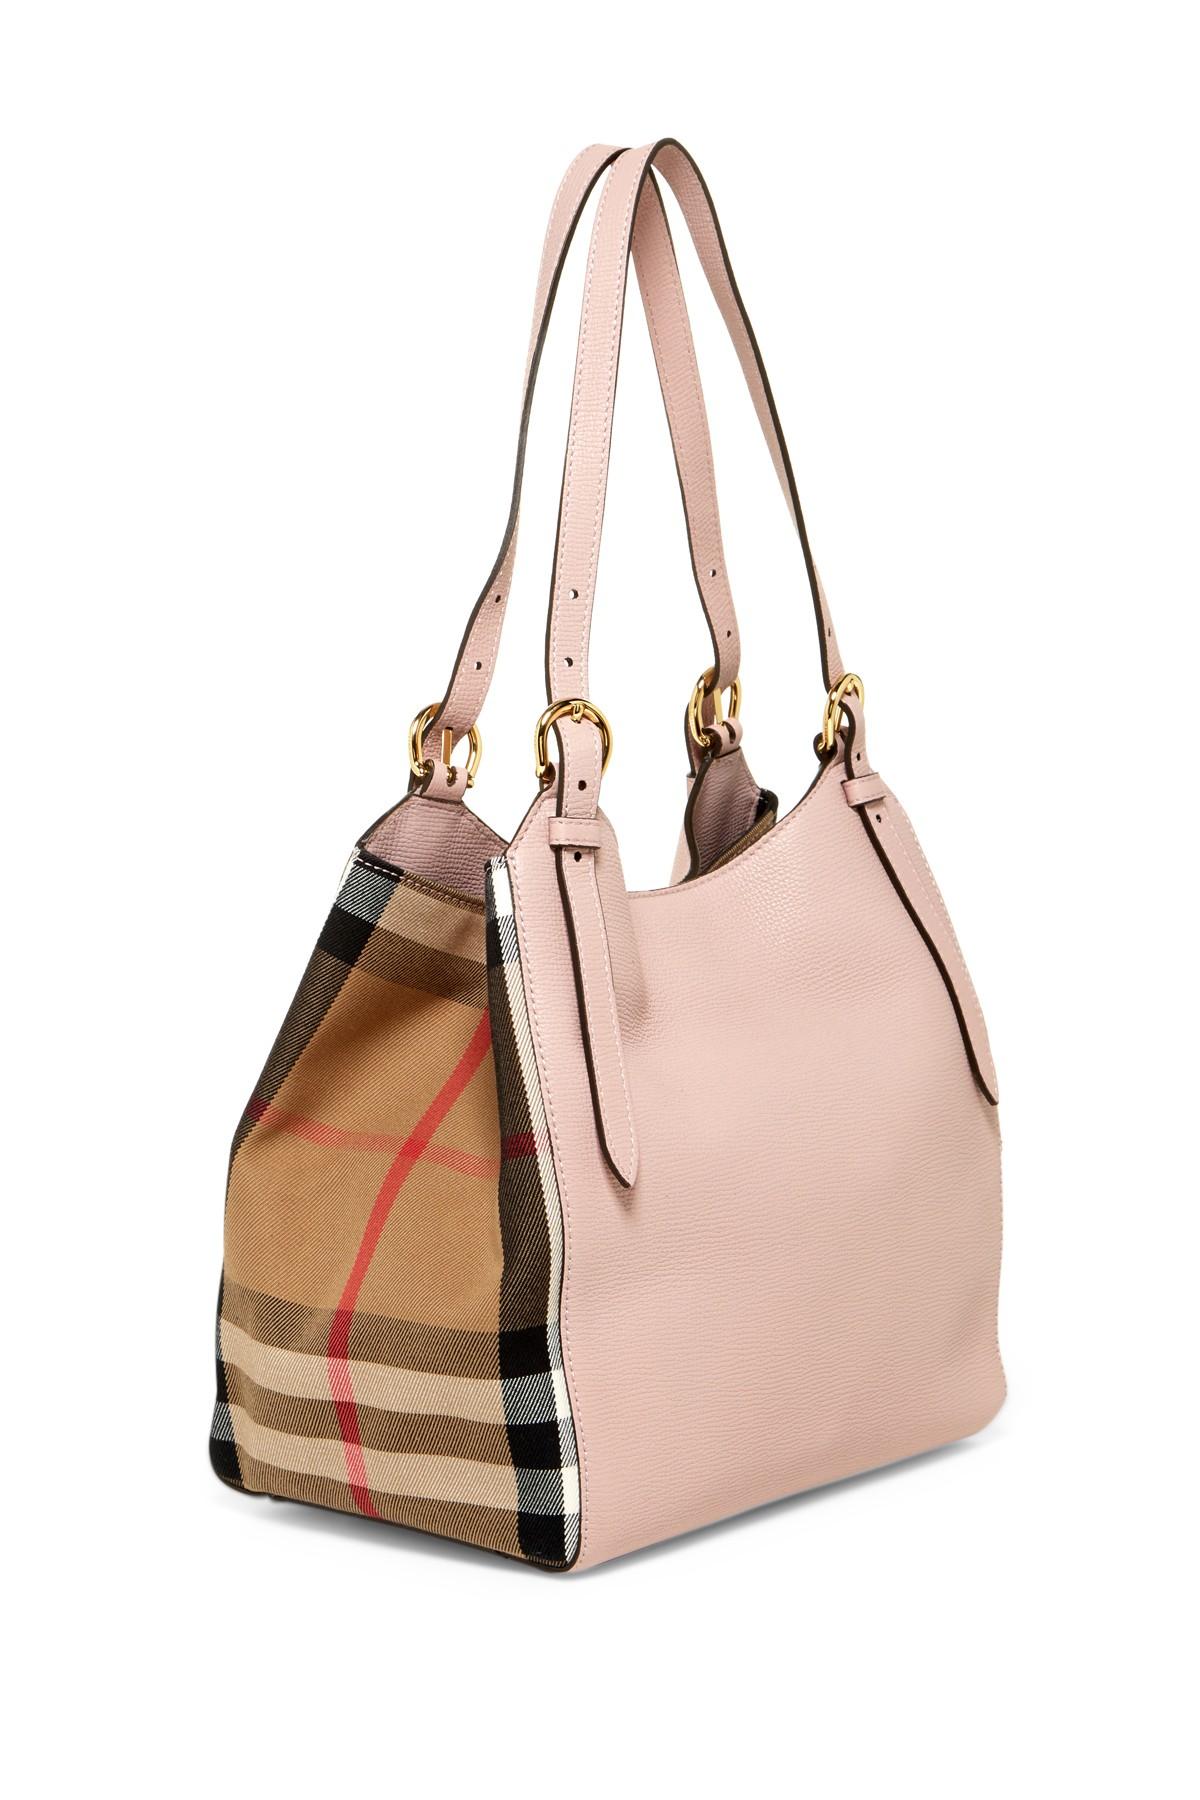 burberry purses at nordstrom